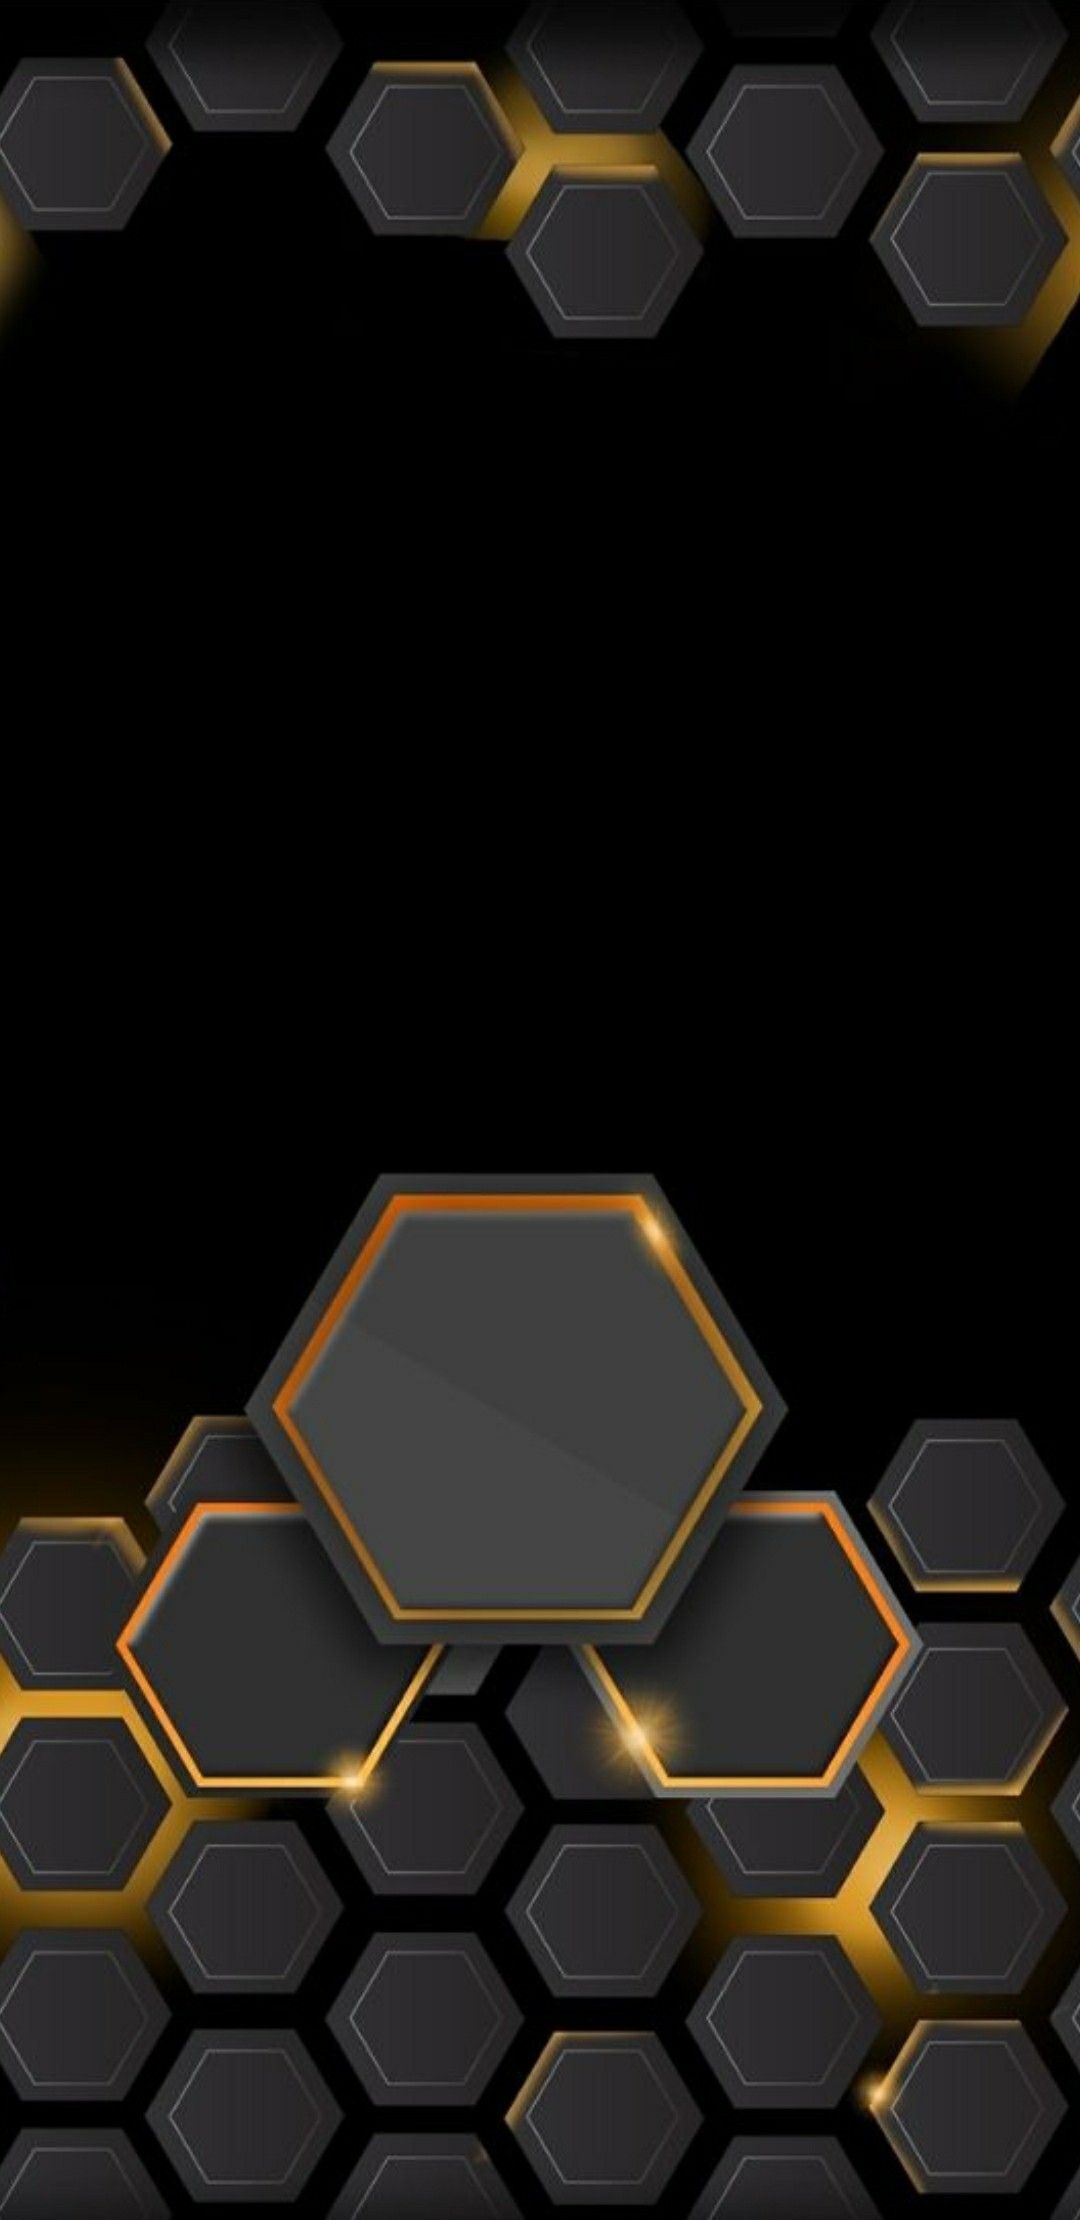 Android hexagon wallpaper, Creative design, User-submitted art, Hexagon theme, 1080x2220 HD Handy